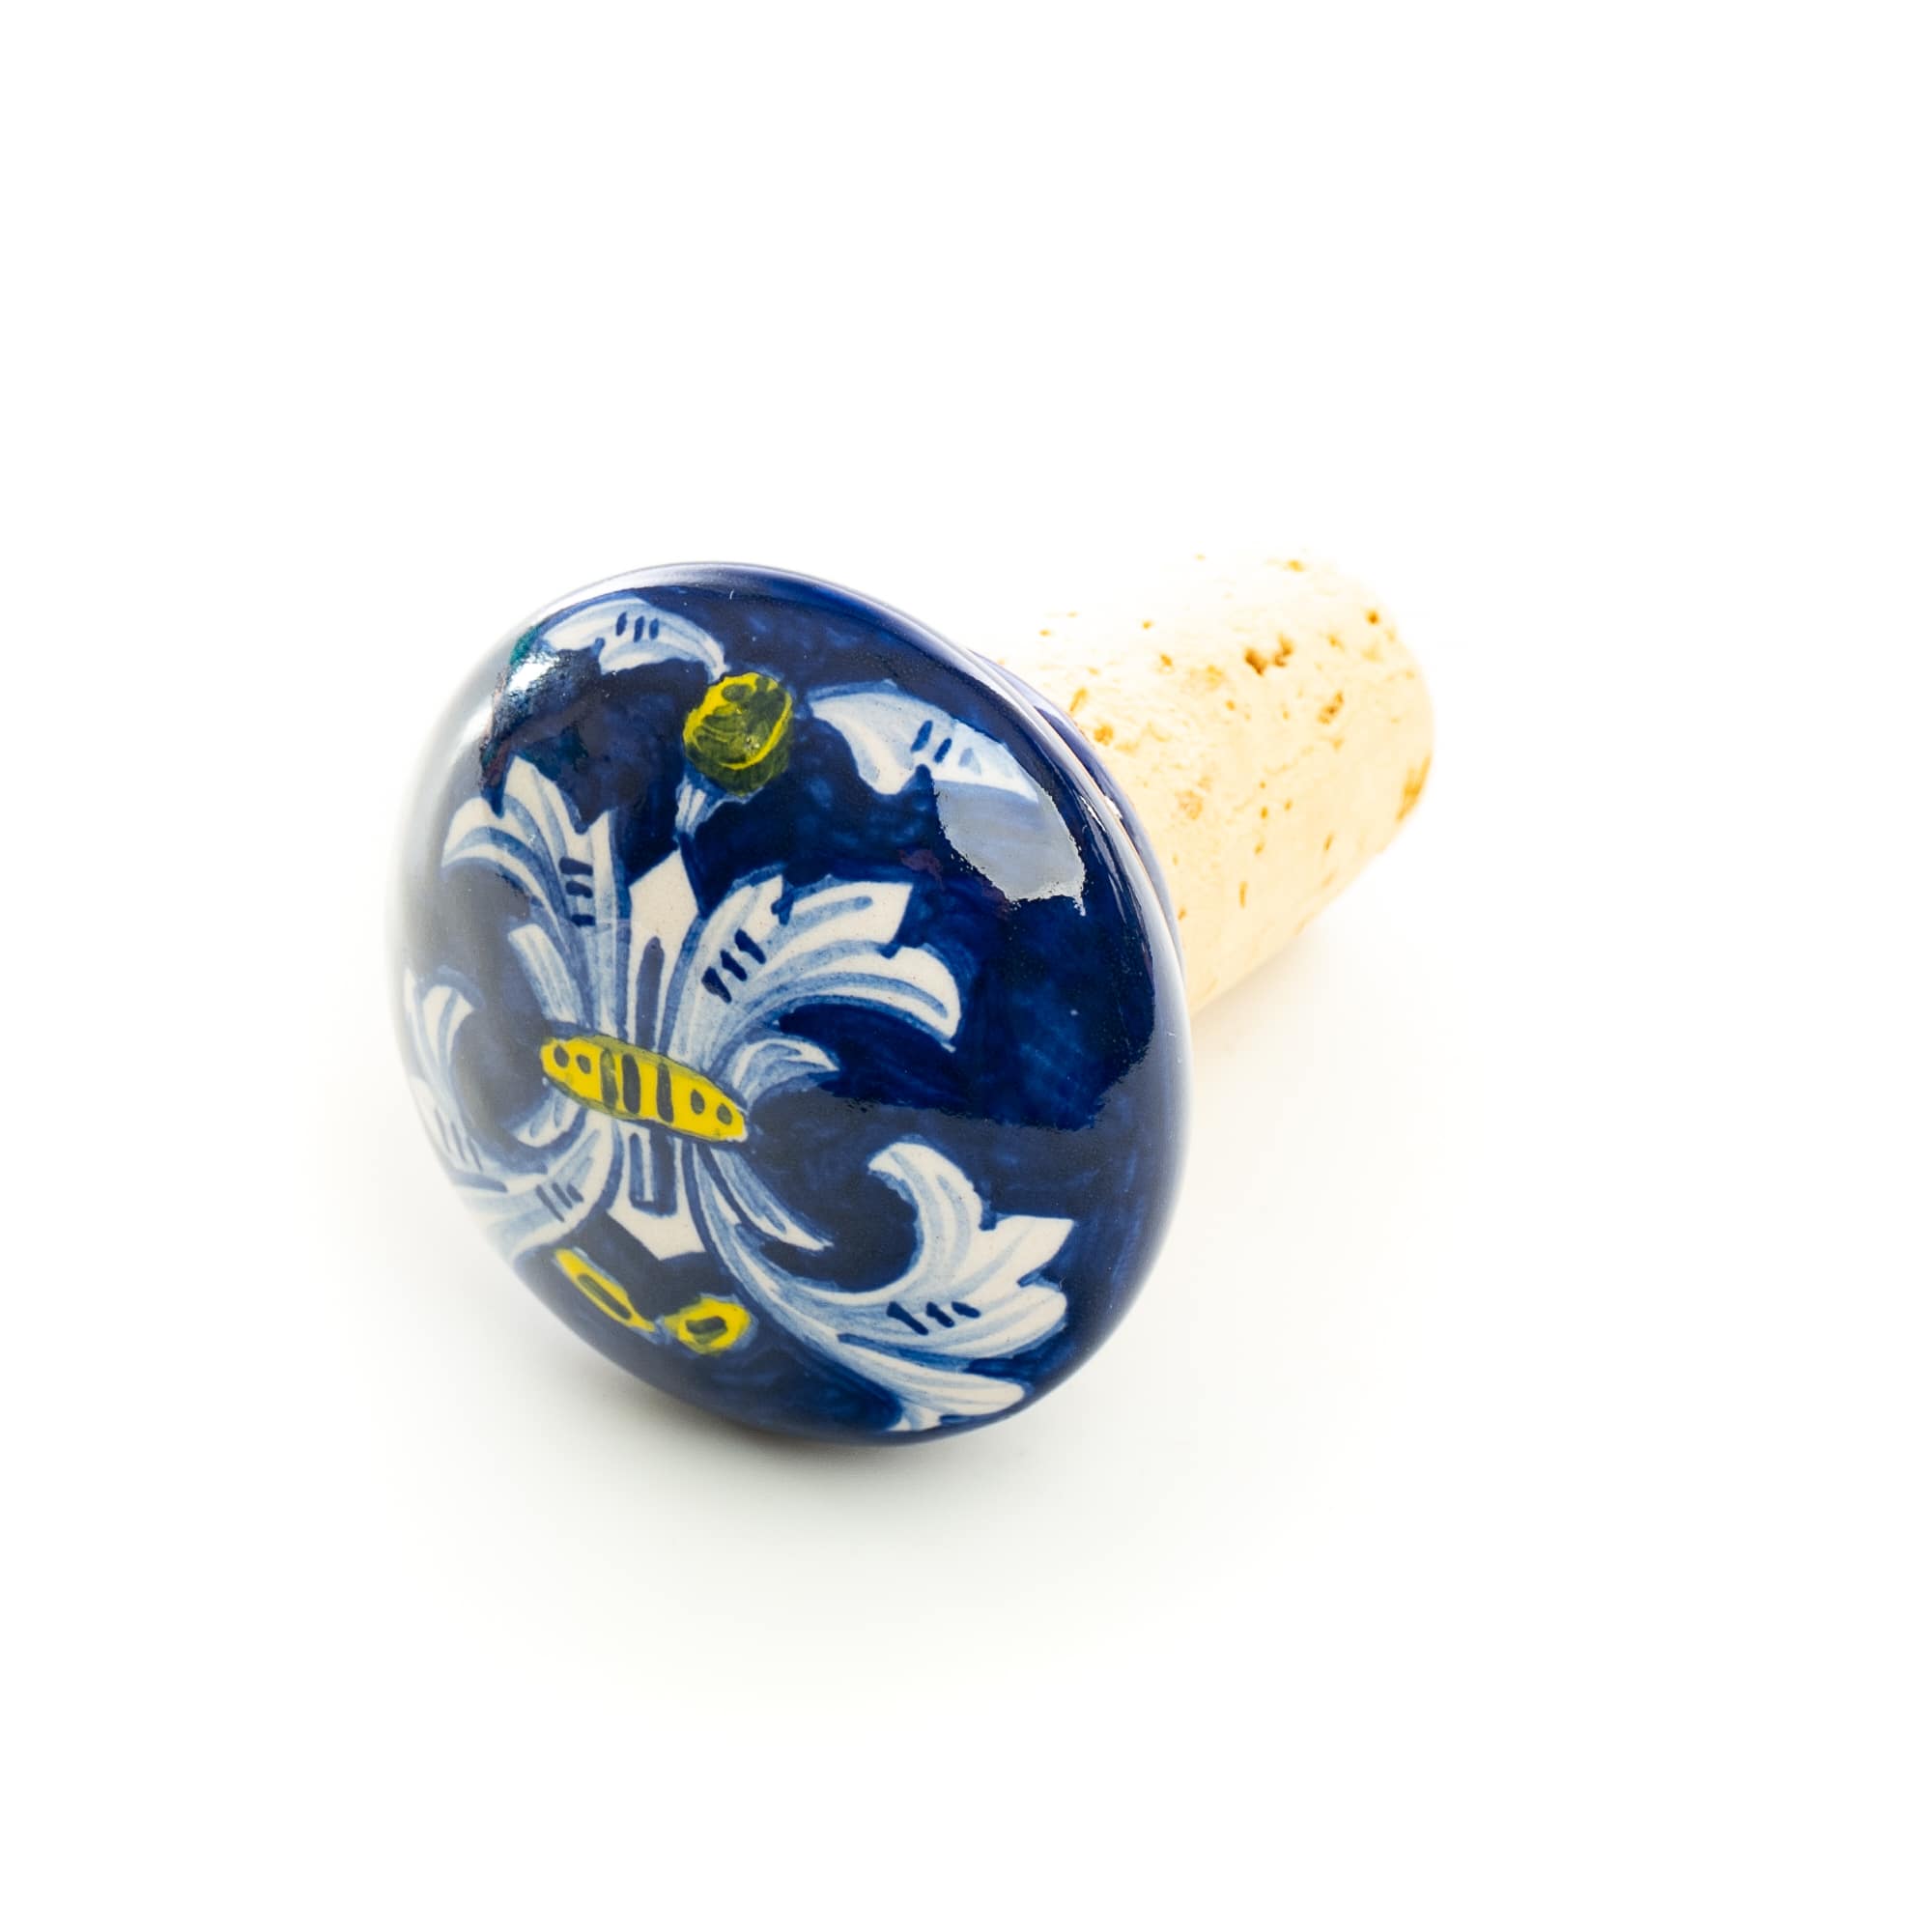 Antico Deruta Wine Stopper, ceramics, pottery, italian design, majolica, handmade, handcrafted, handpainted, home decor, kitchen art, home goods, deruta, majolica, Artisan, treasures, traditional art, modern art, gift ideas, style, SF, shop small business, artists, shop online, landmark store, legacy, one of a kind, limited edition, gift guide, gift shop, retail shop, decorations, shopping, italy, home staging, home decorating, home interiors